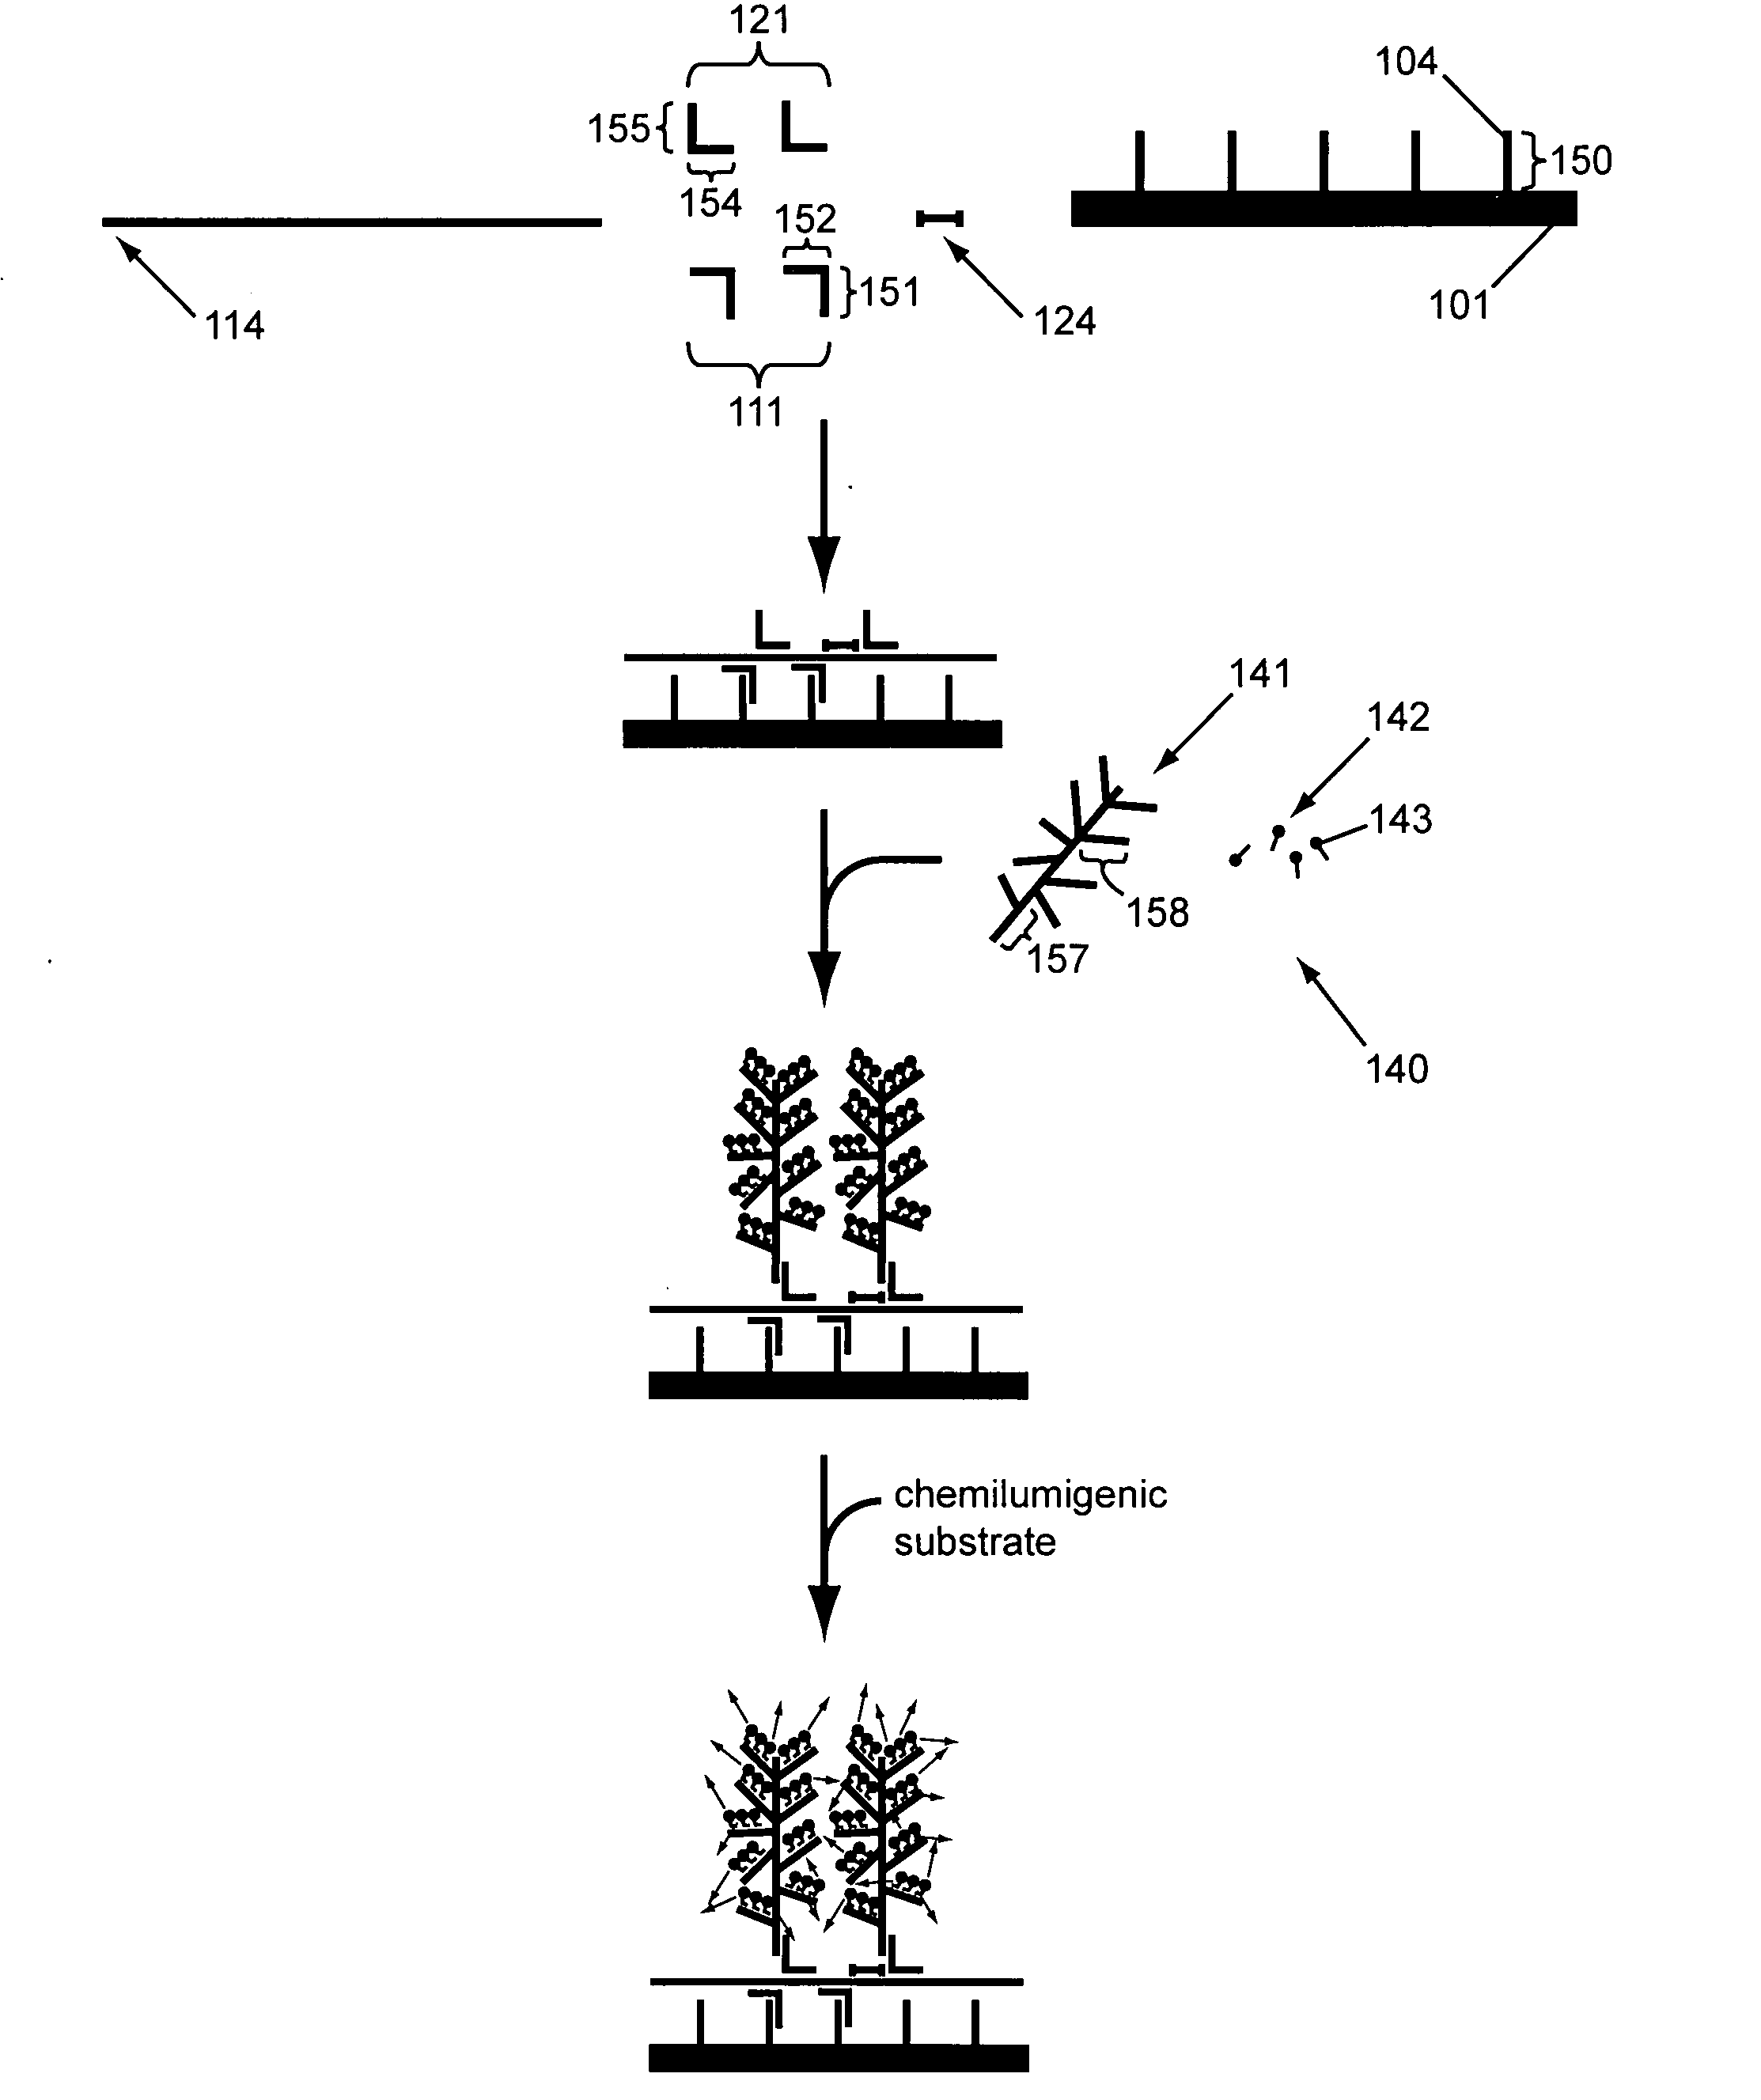 Two stage nucleic acid amplification using an amplification oligomer